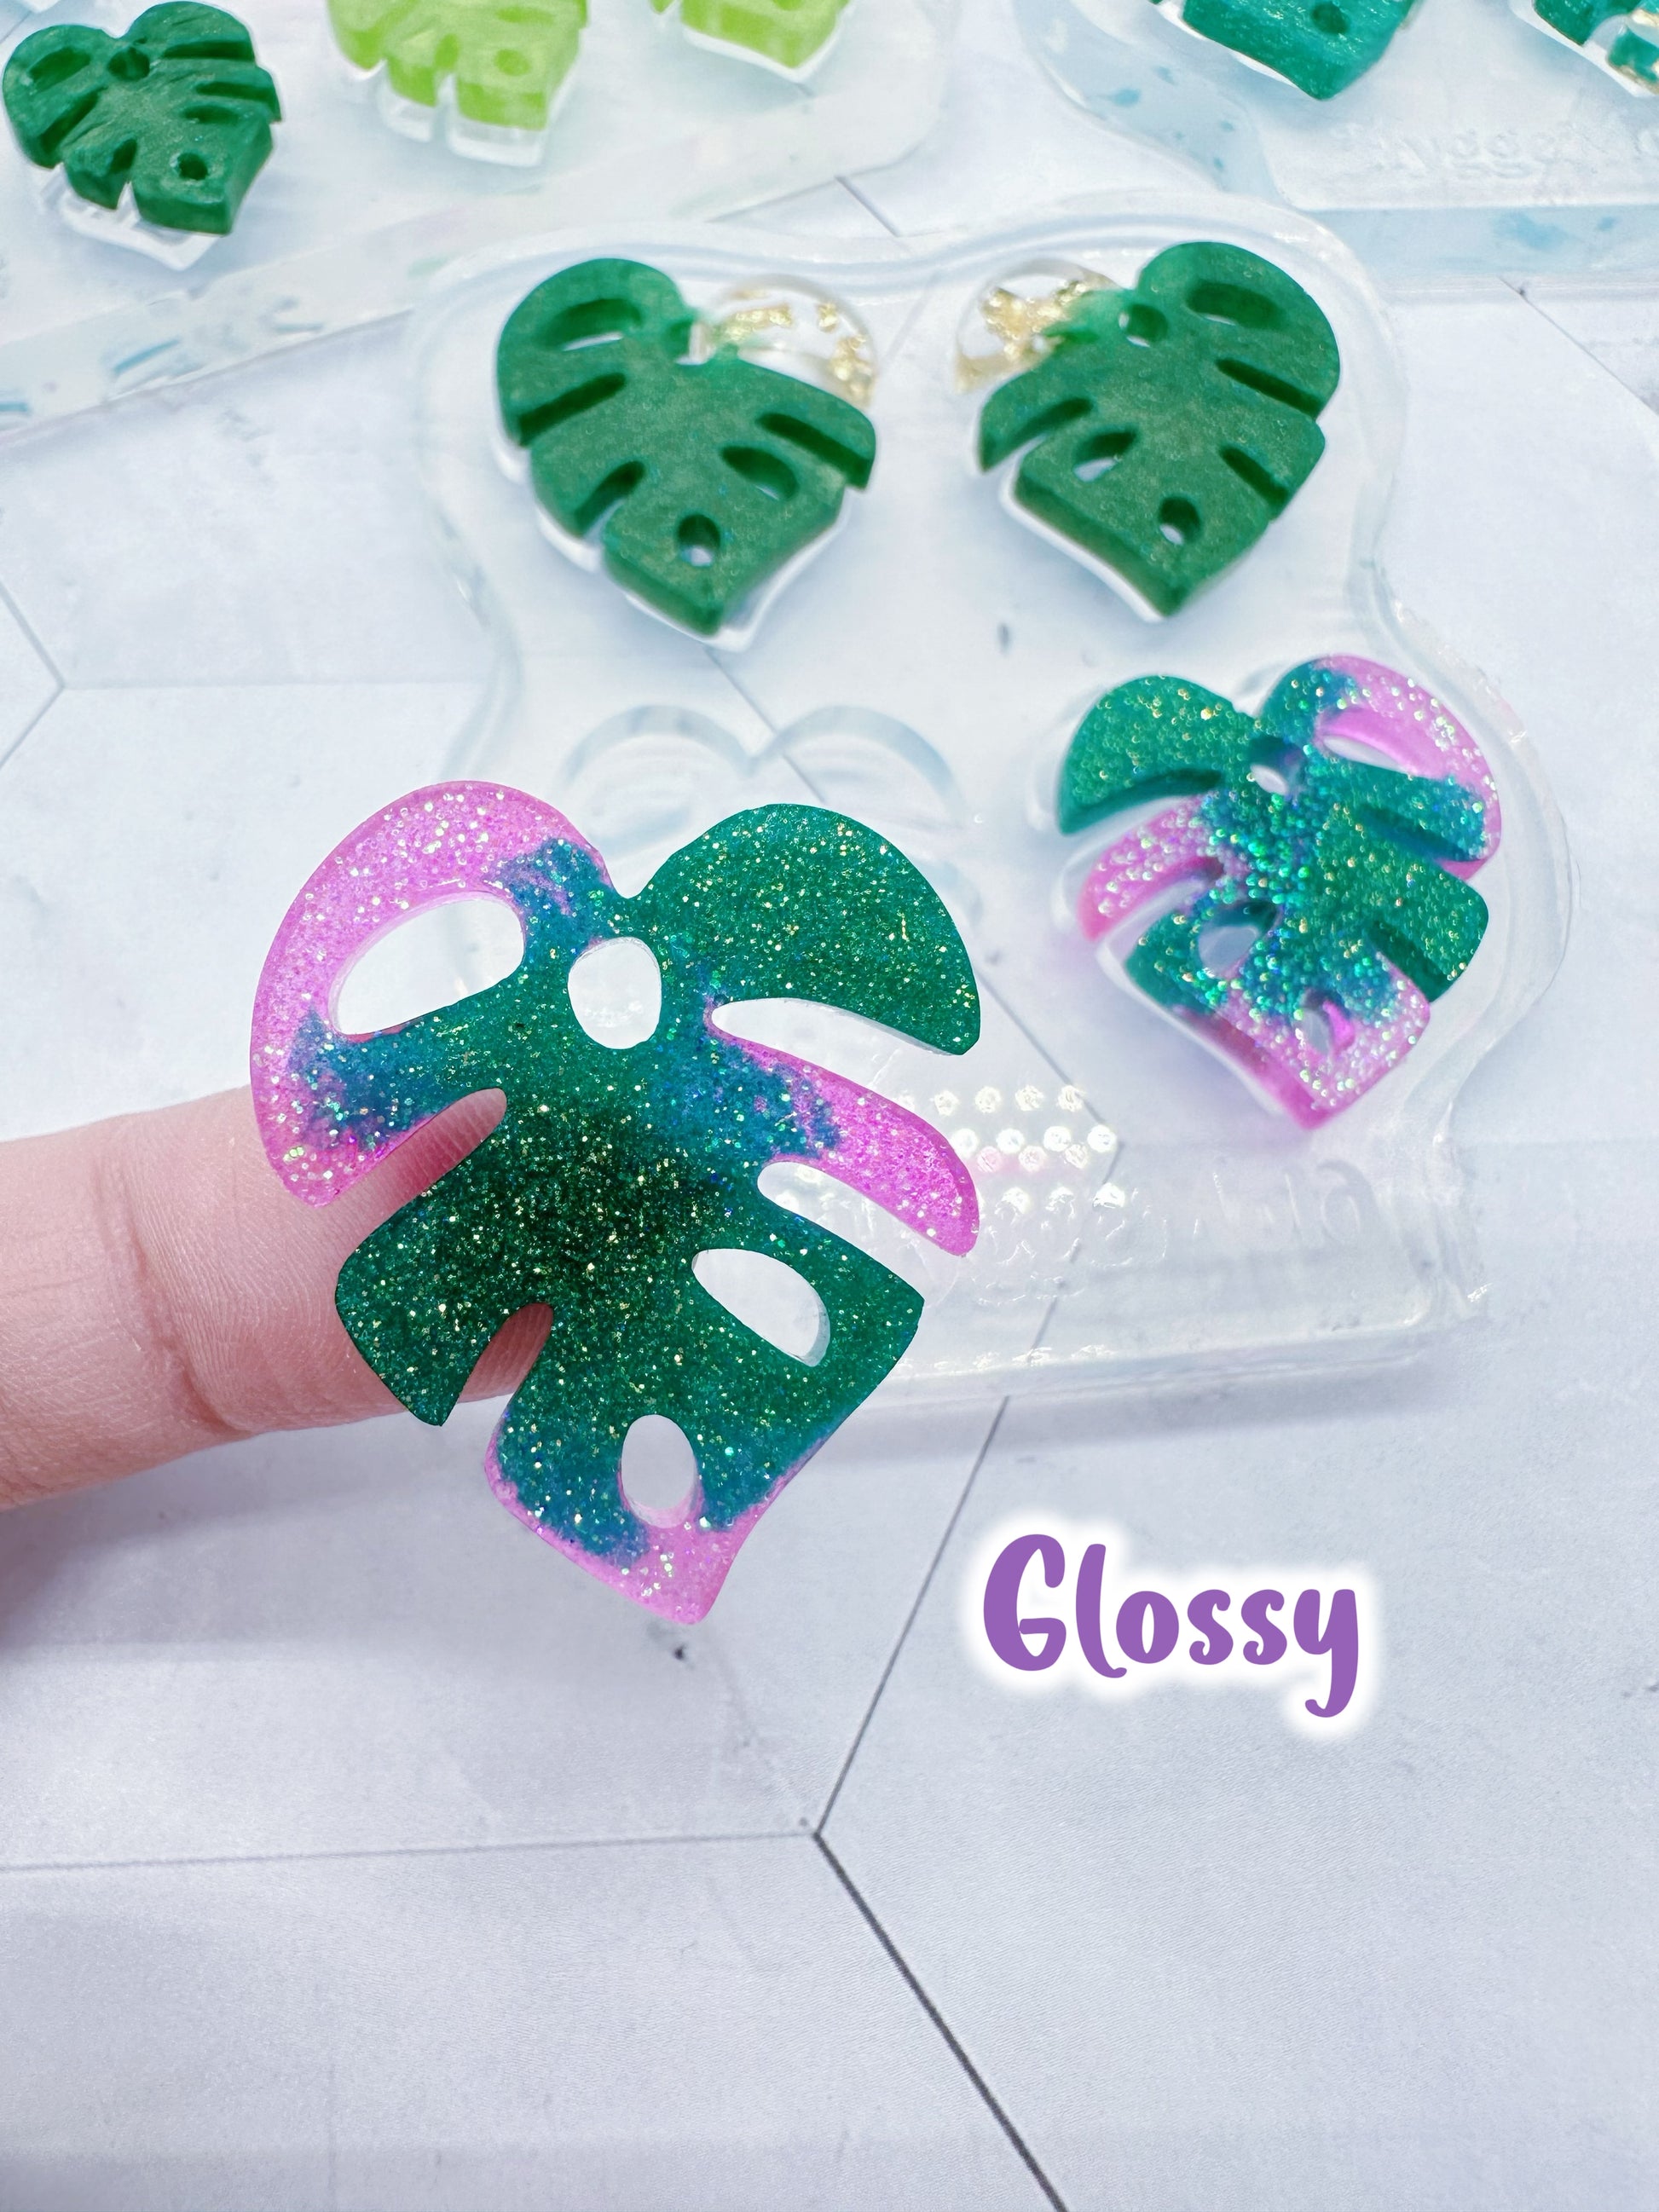 Glossy Texture Monstera Leaf Resin Earring Mold Clear Silicone Mold for resin